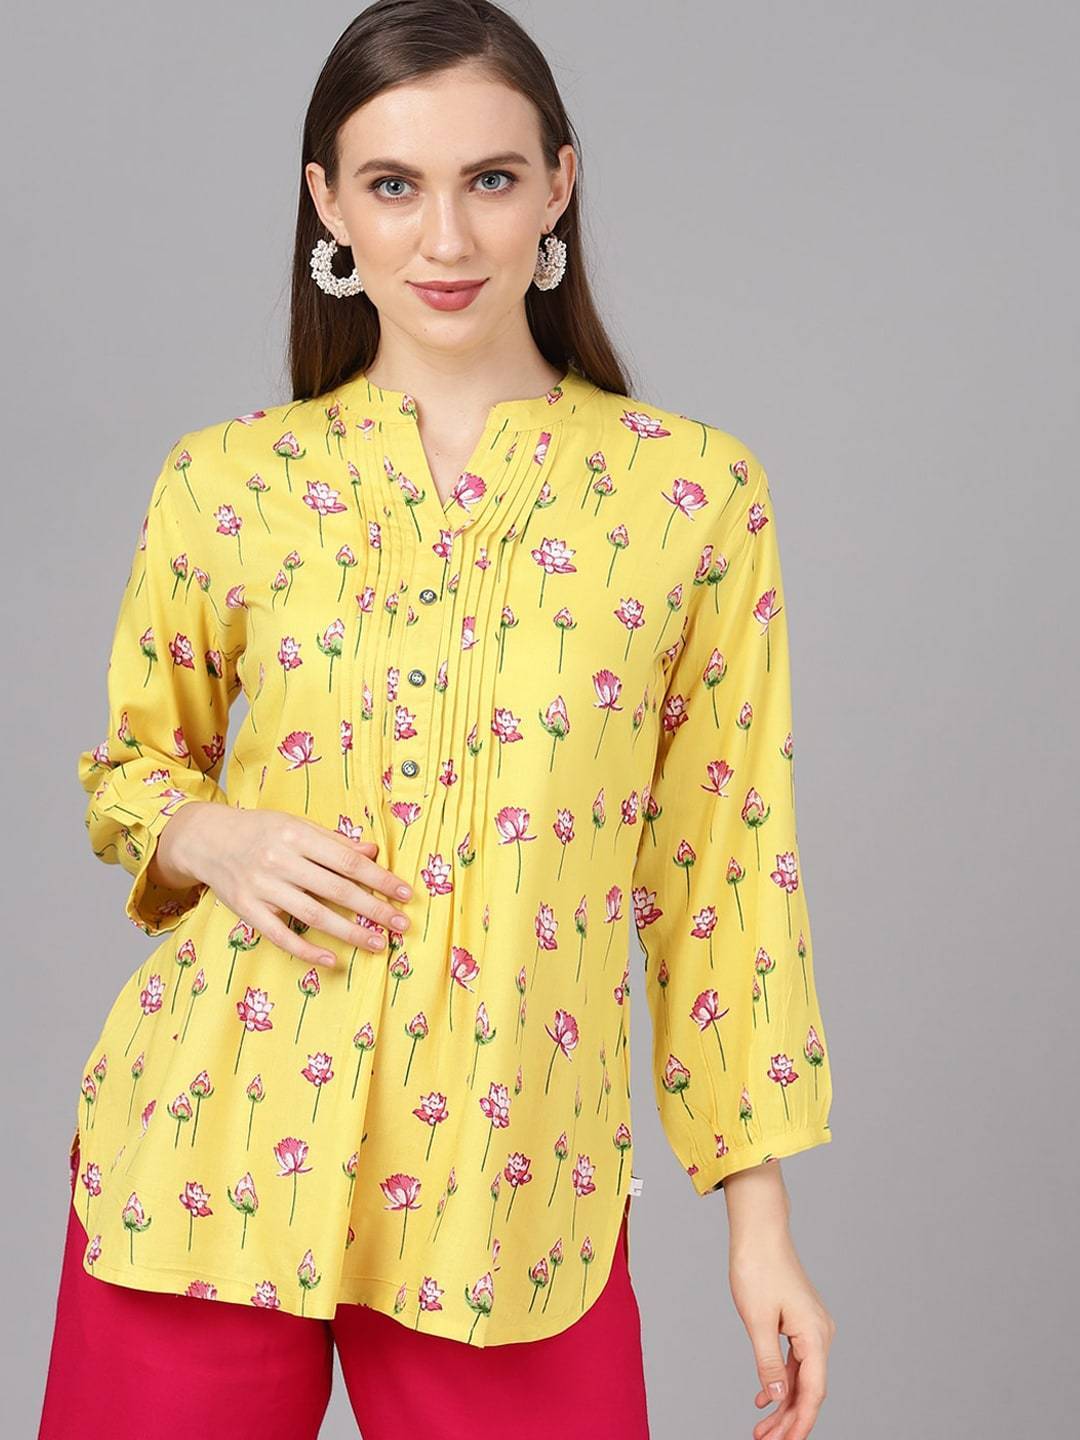 Women's  Yellow Floral Printed Top - AKS